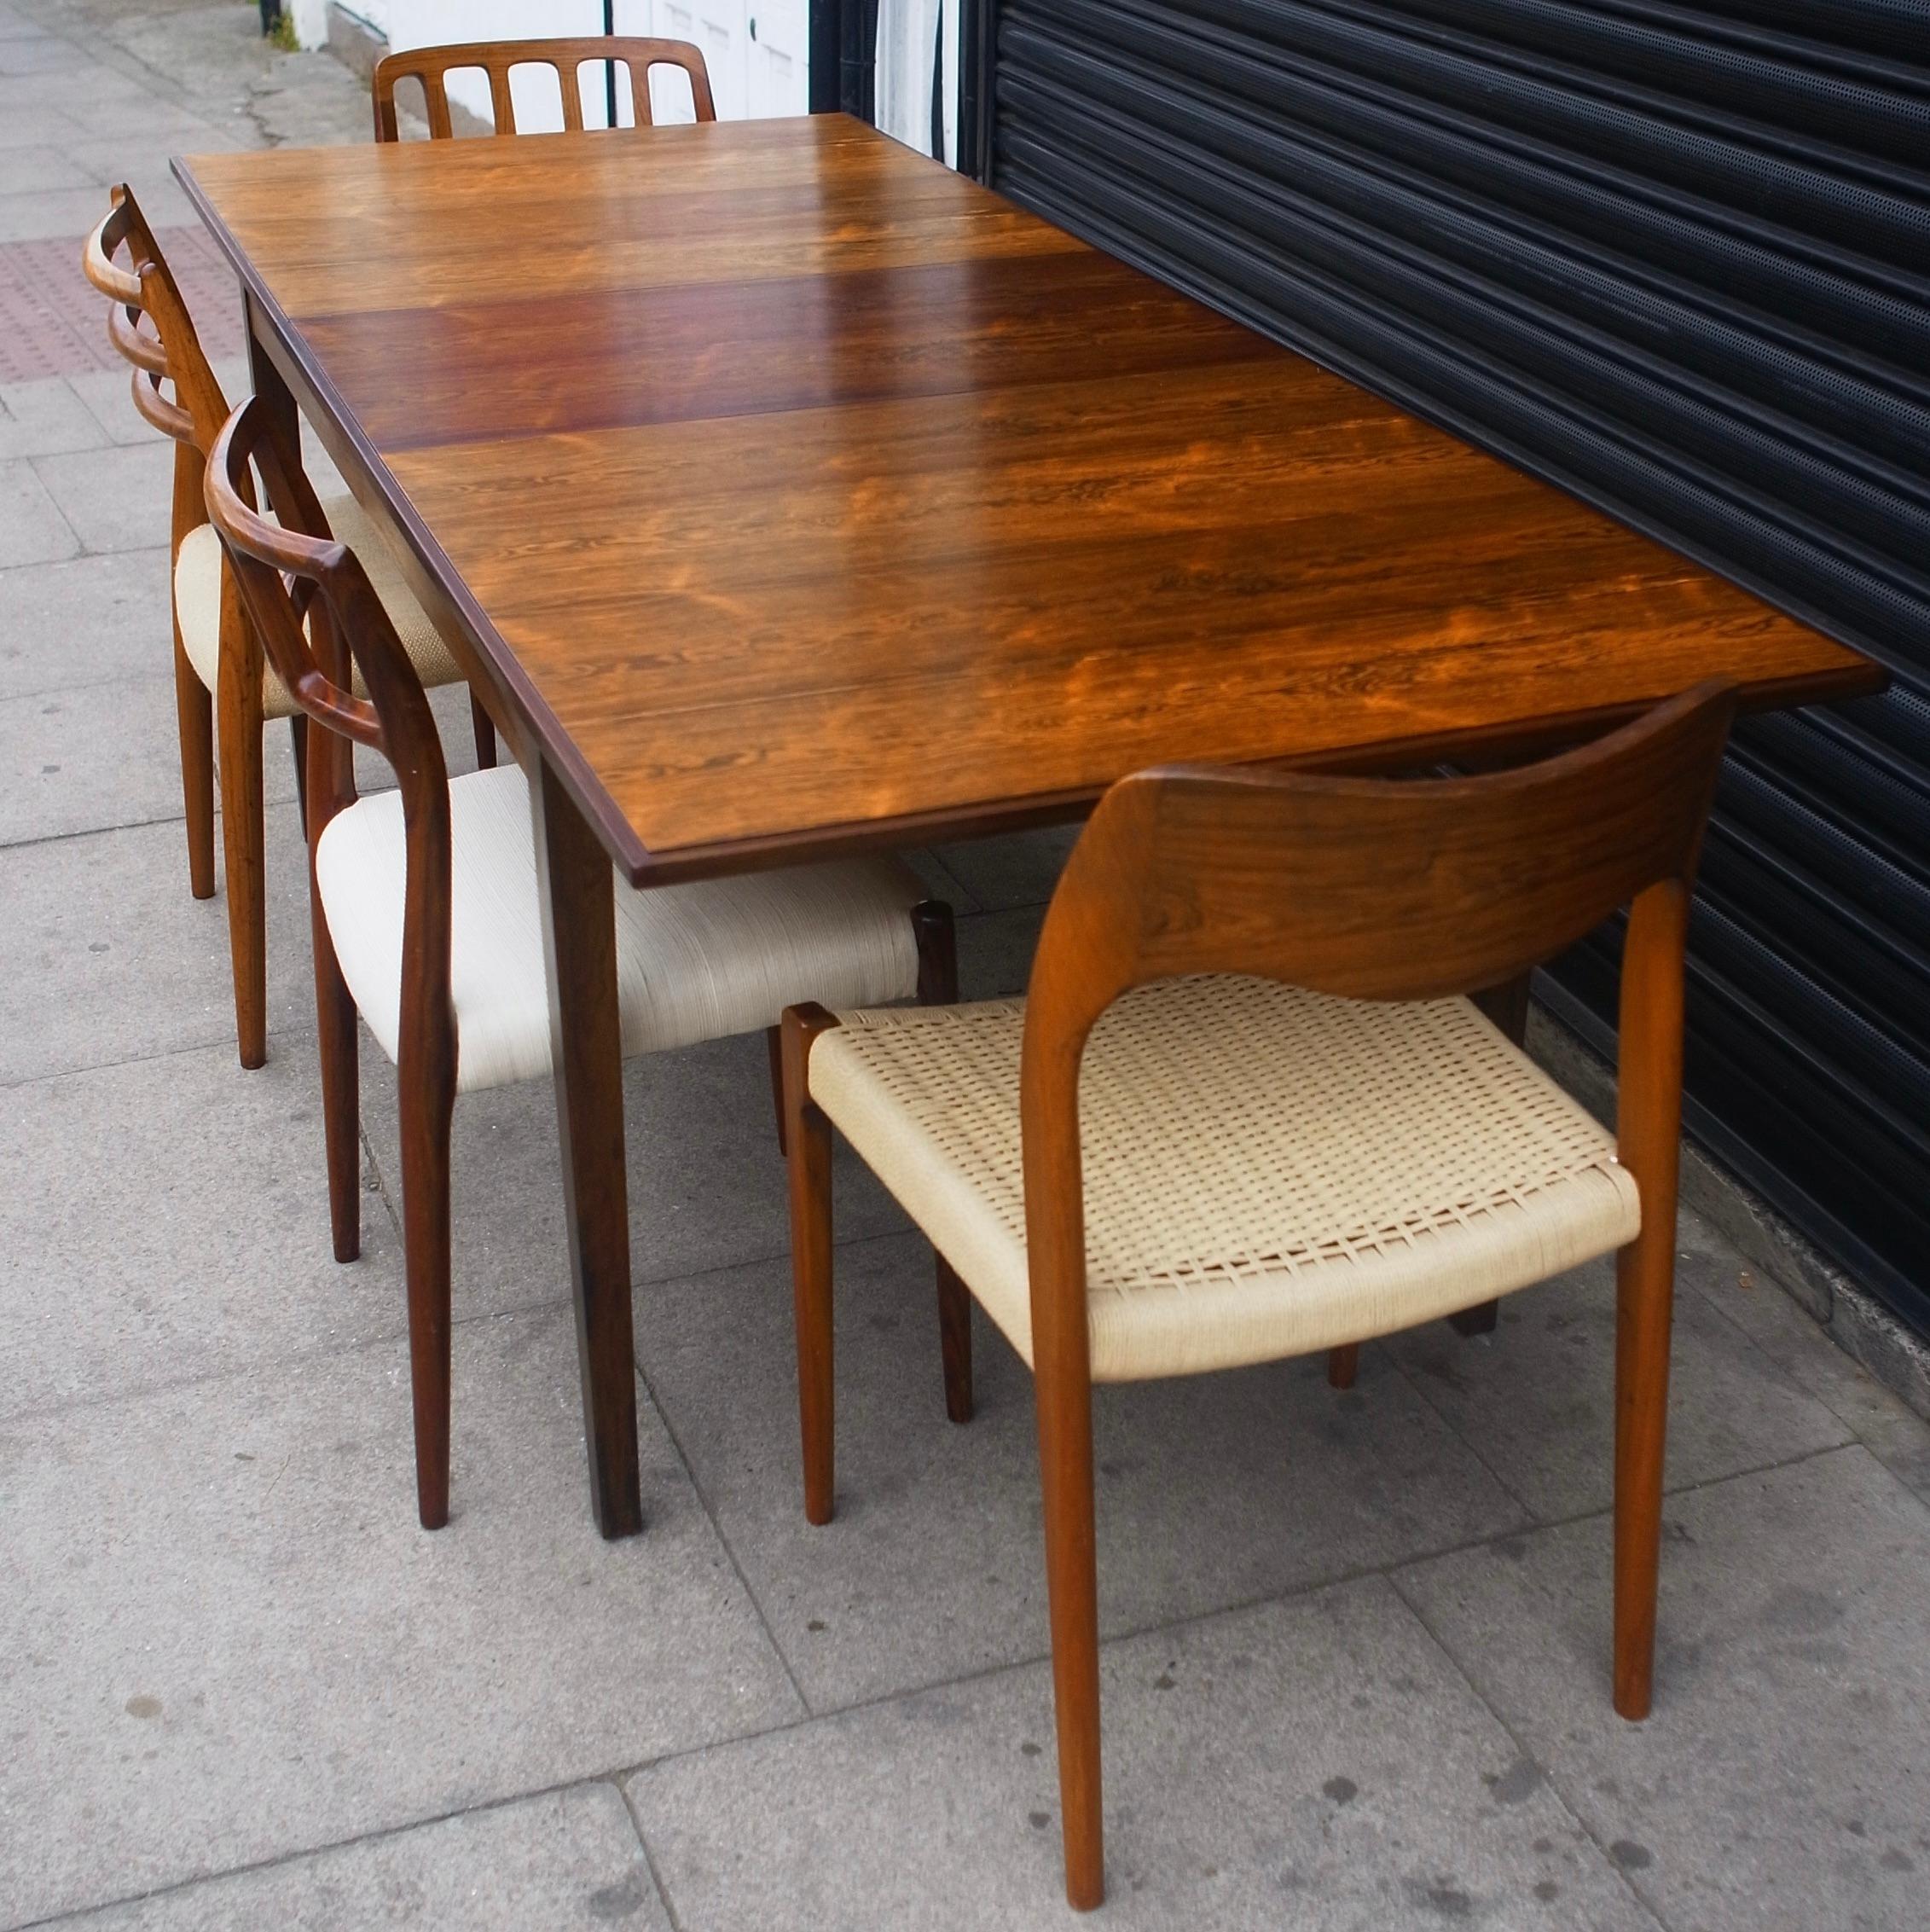 20th Century Hardwood Dining Table by Robert Heritage for Archie Shine, circa 1966